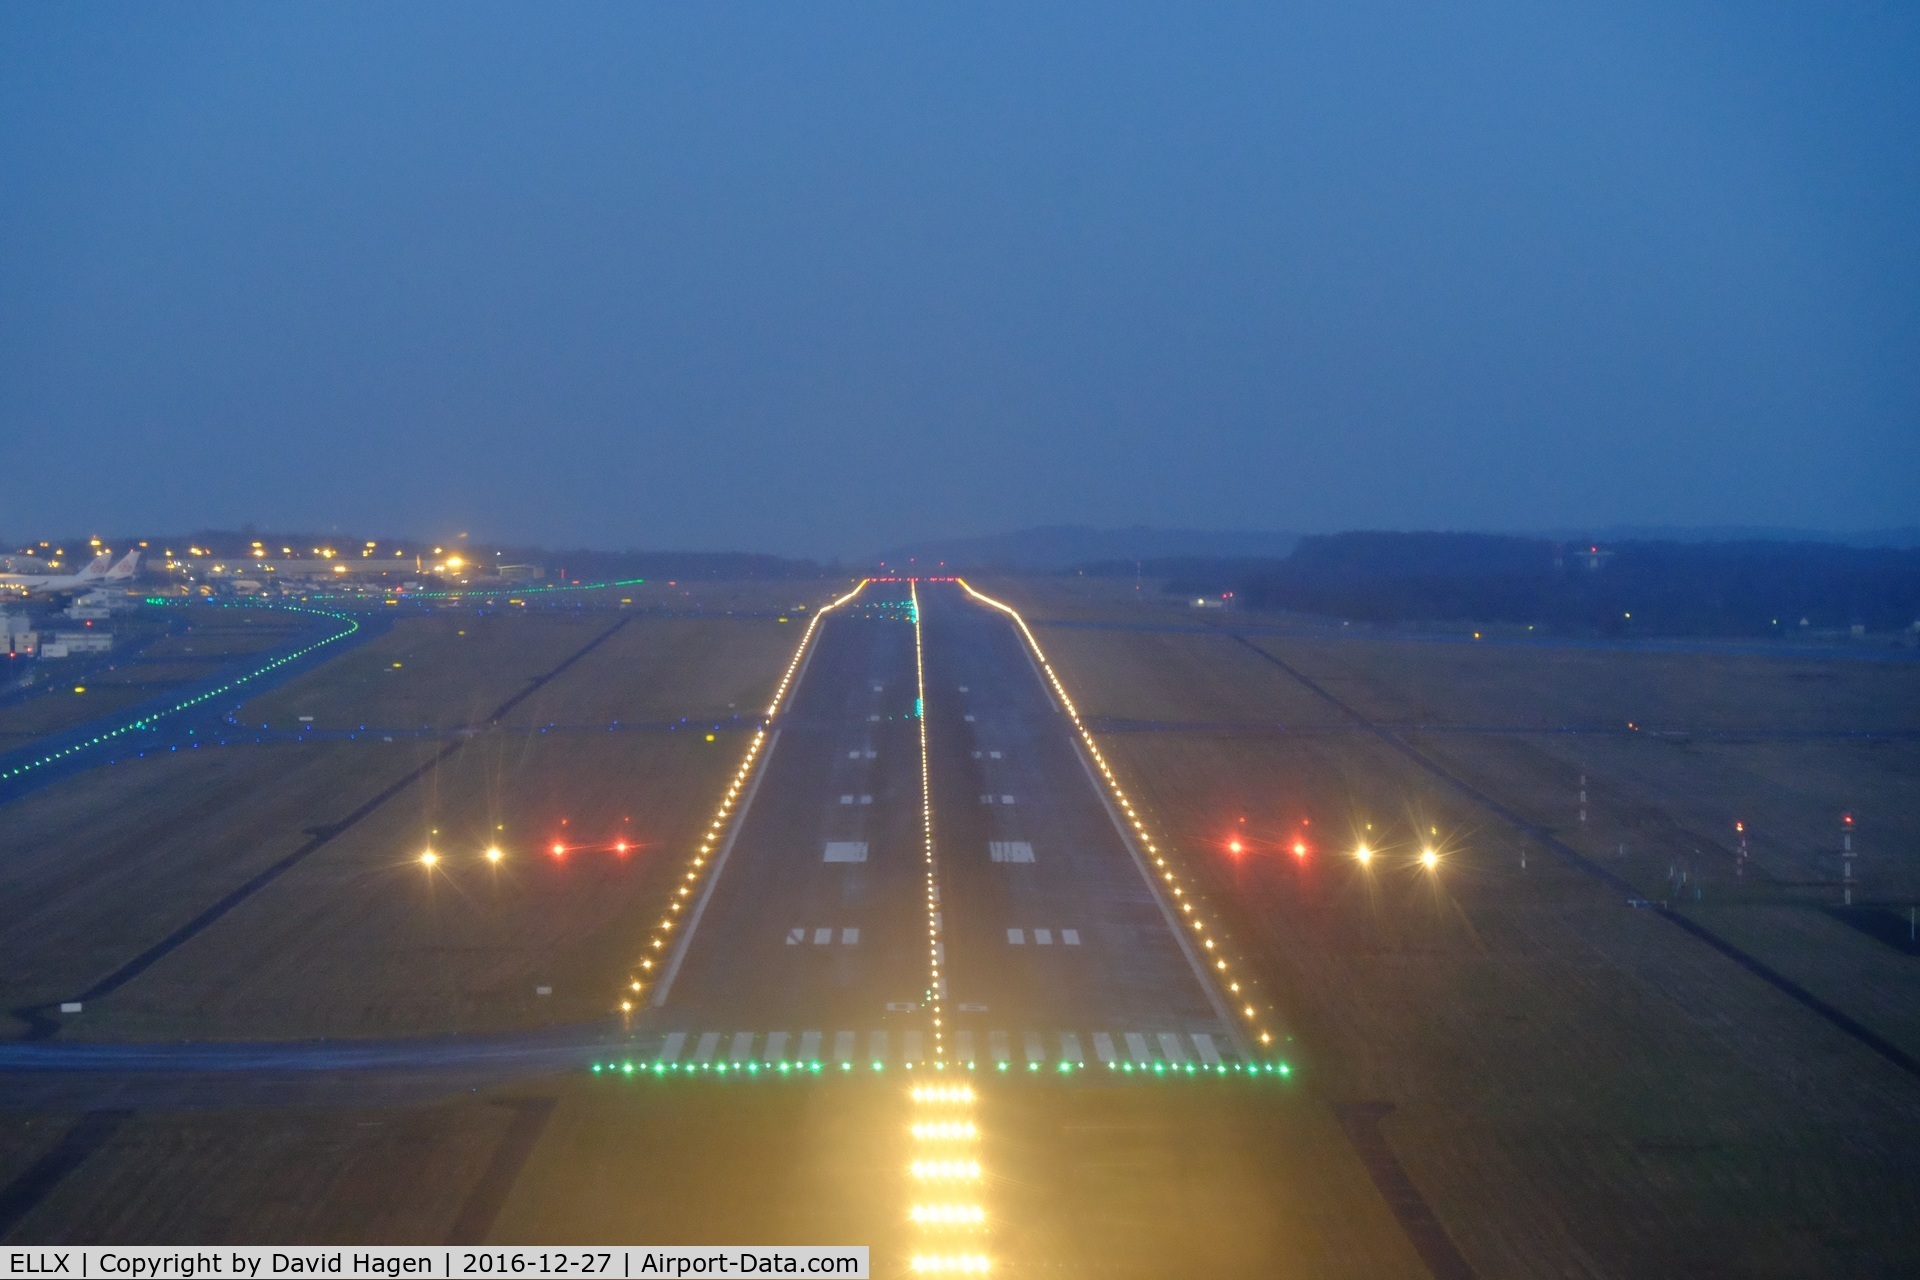 Luxembourg International Airport, Luxembourg Luxembourg (ELLX) - Final runway 06 in Luxembourg at 17:00 LT after sunset in December.